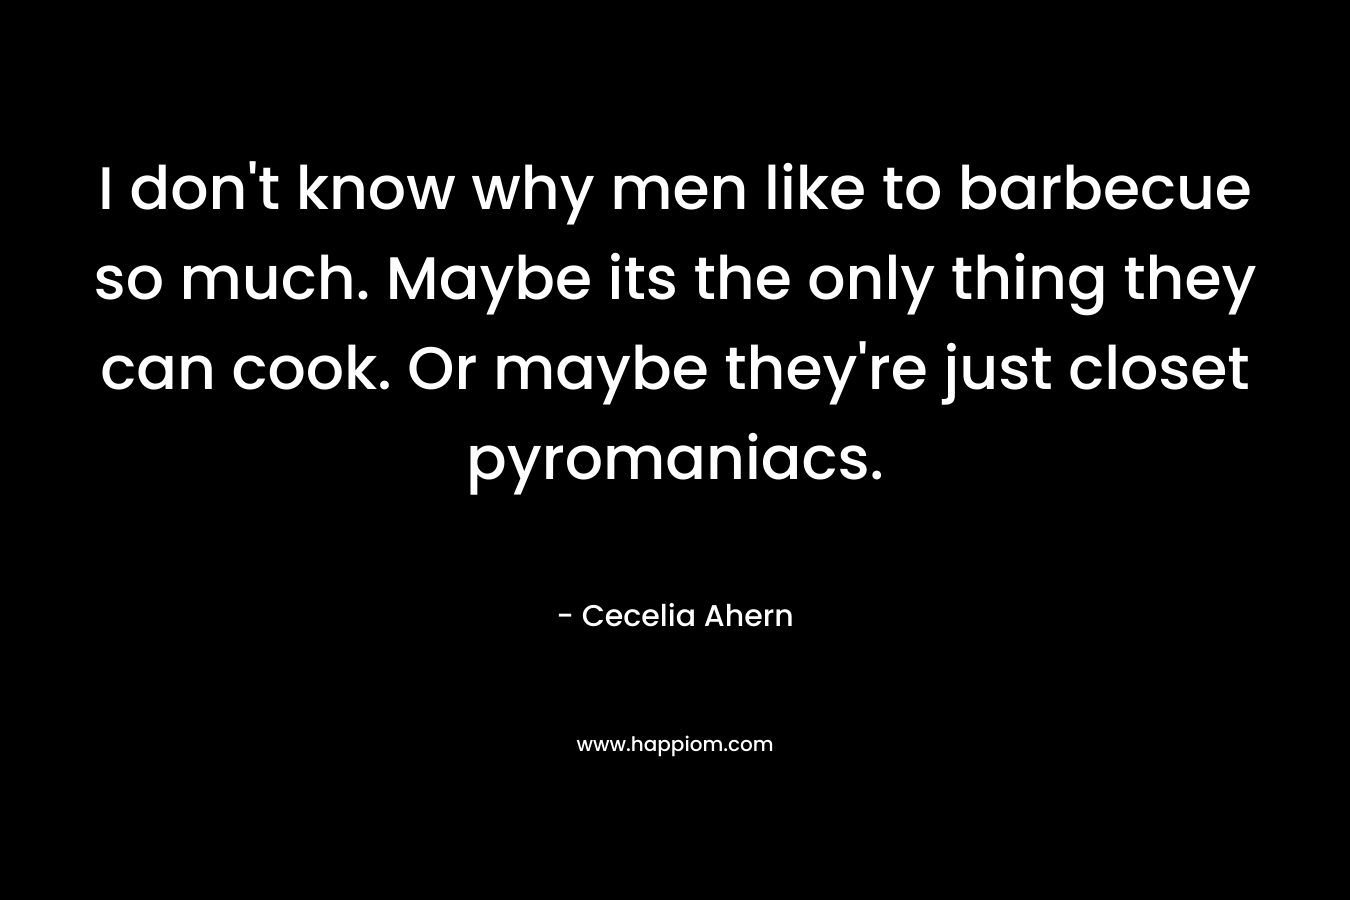 I don't know why men like to barbecue so much. Maybe its the only thing they can cook. Or maybe they're just closet pyromaniacs.